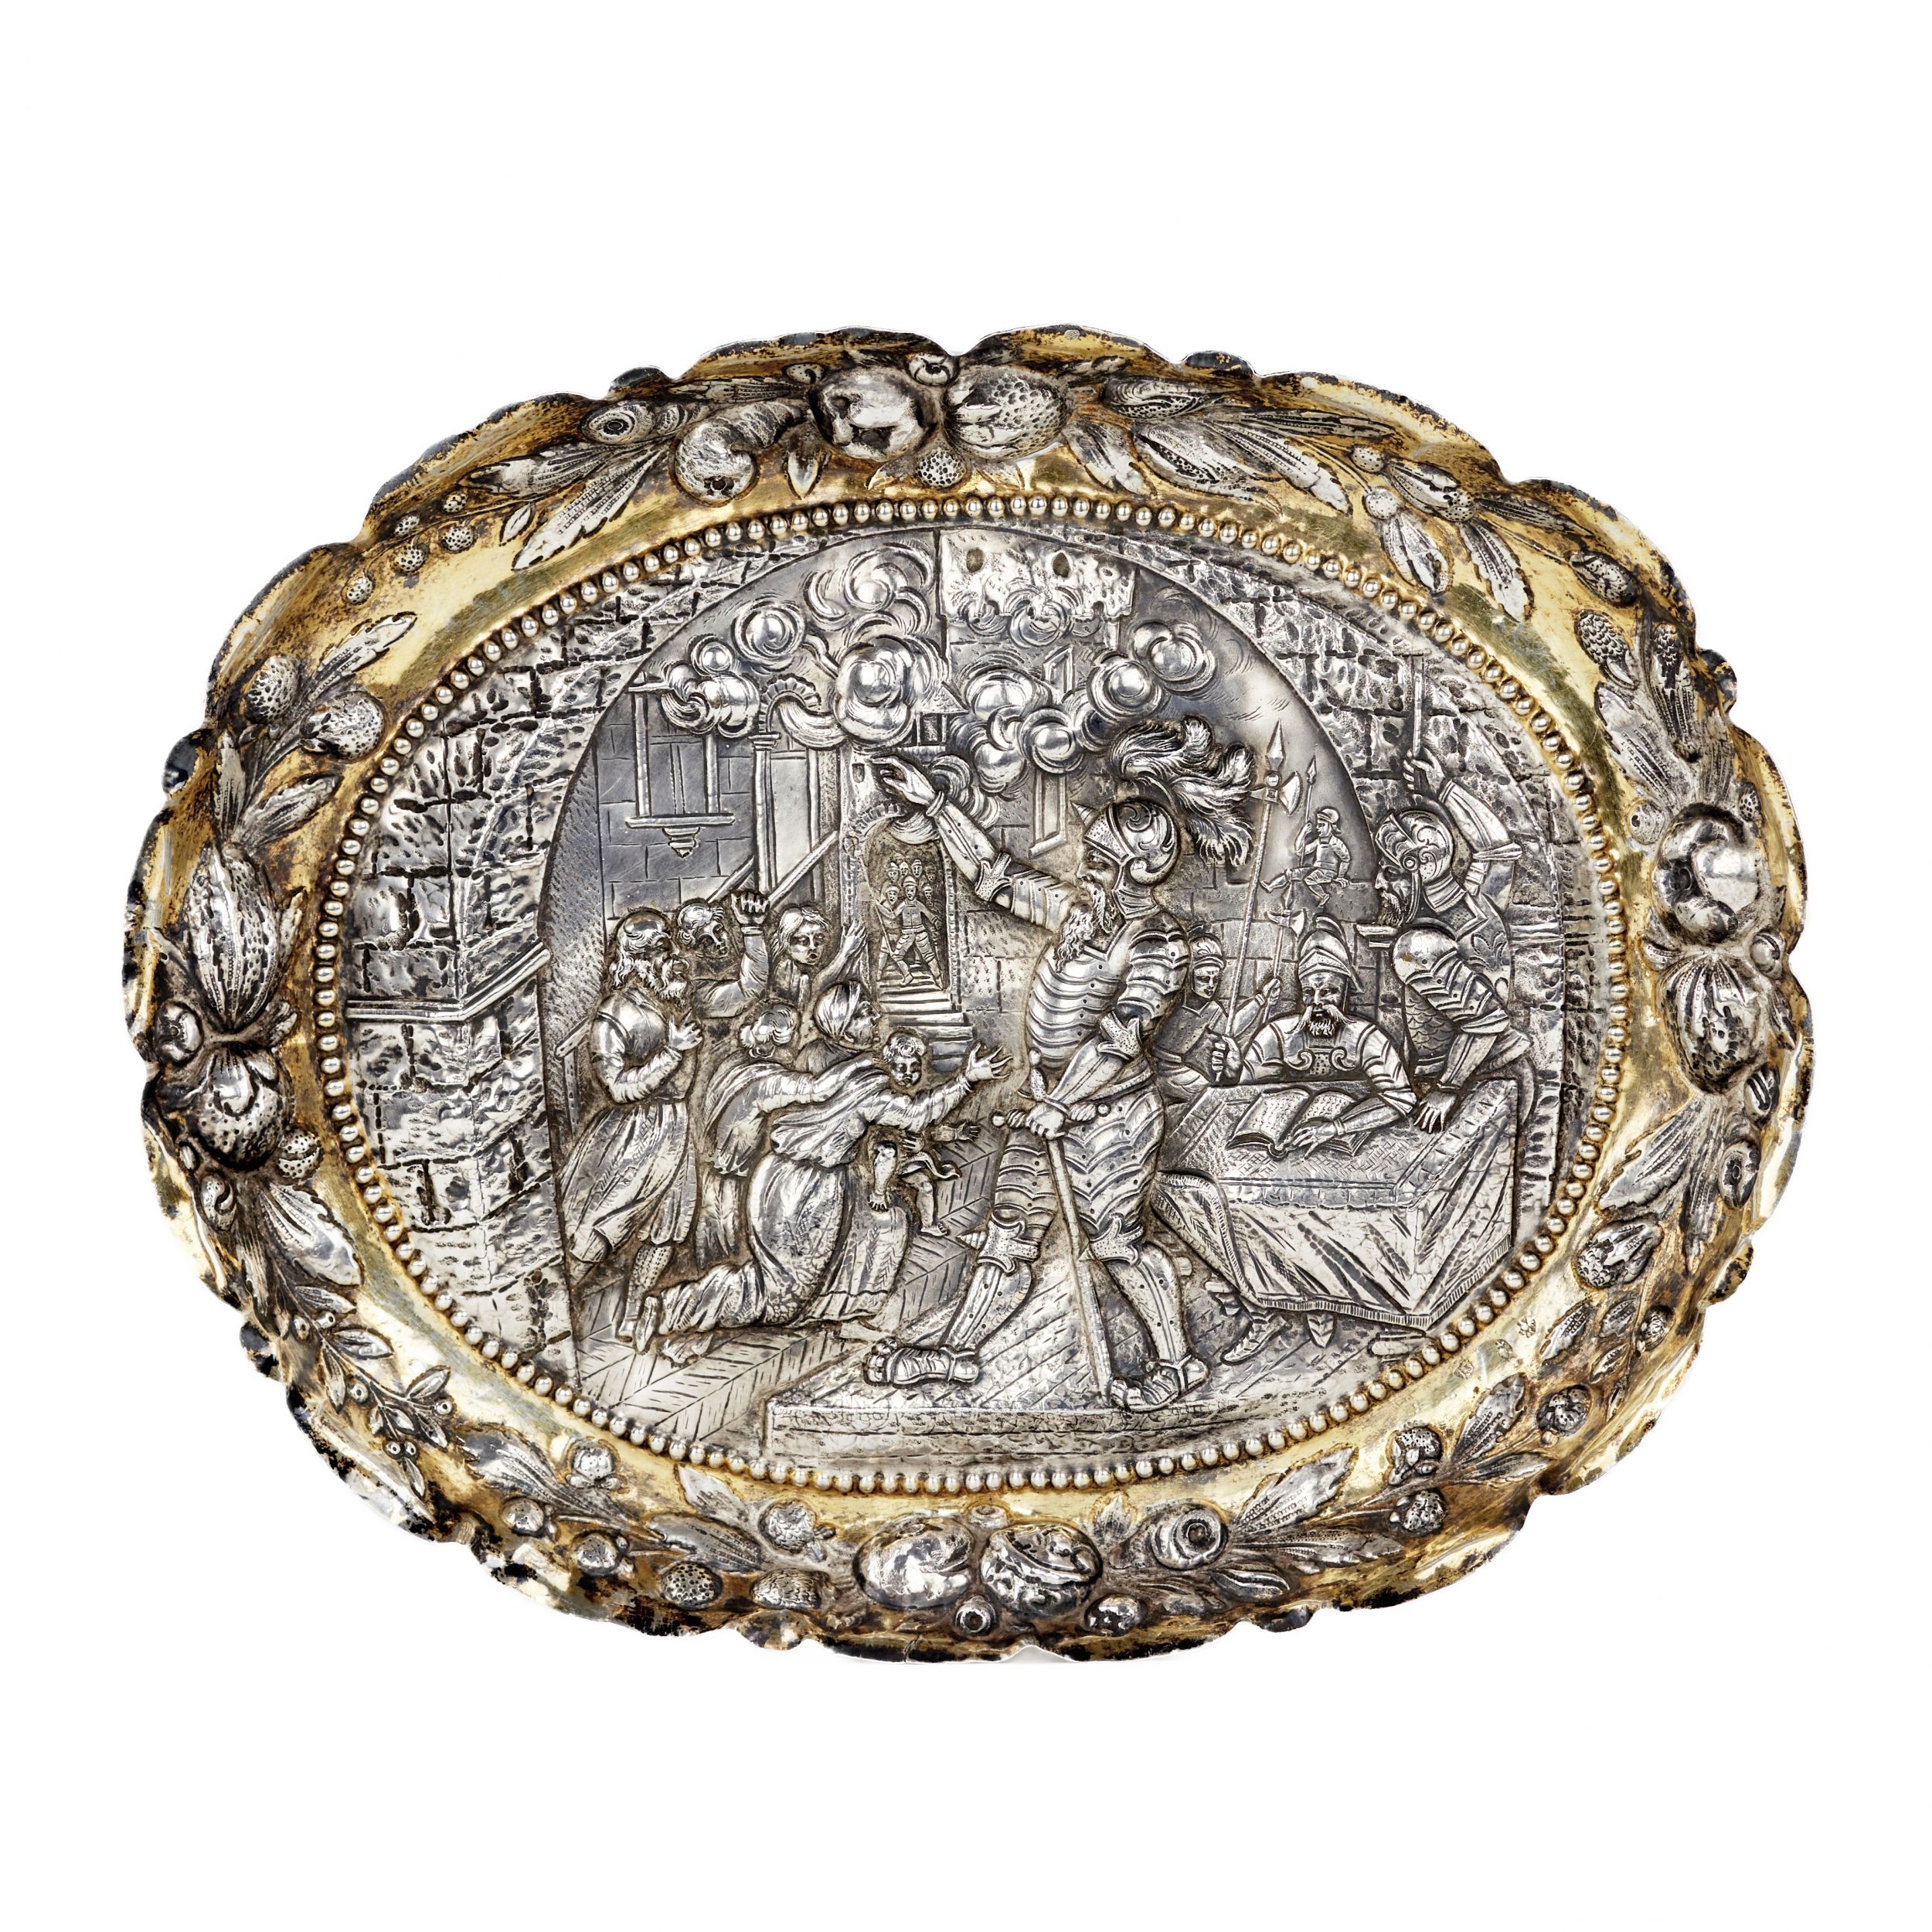 Silver-decorative-dish-with-a-scene-of-a-knight&39;s-court-19th-century-